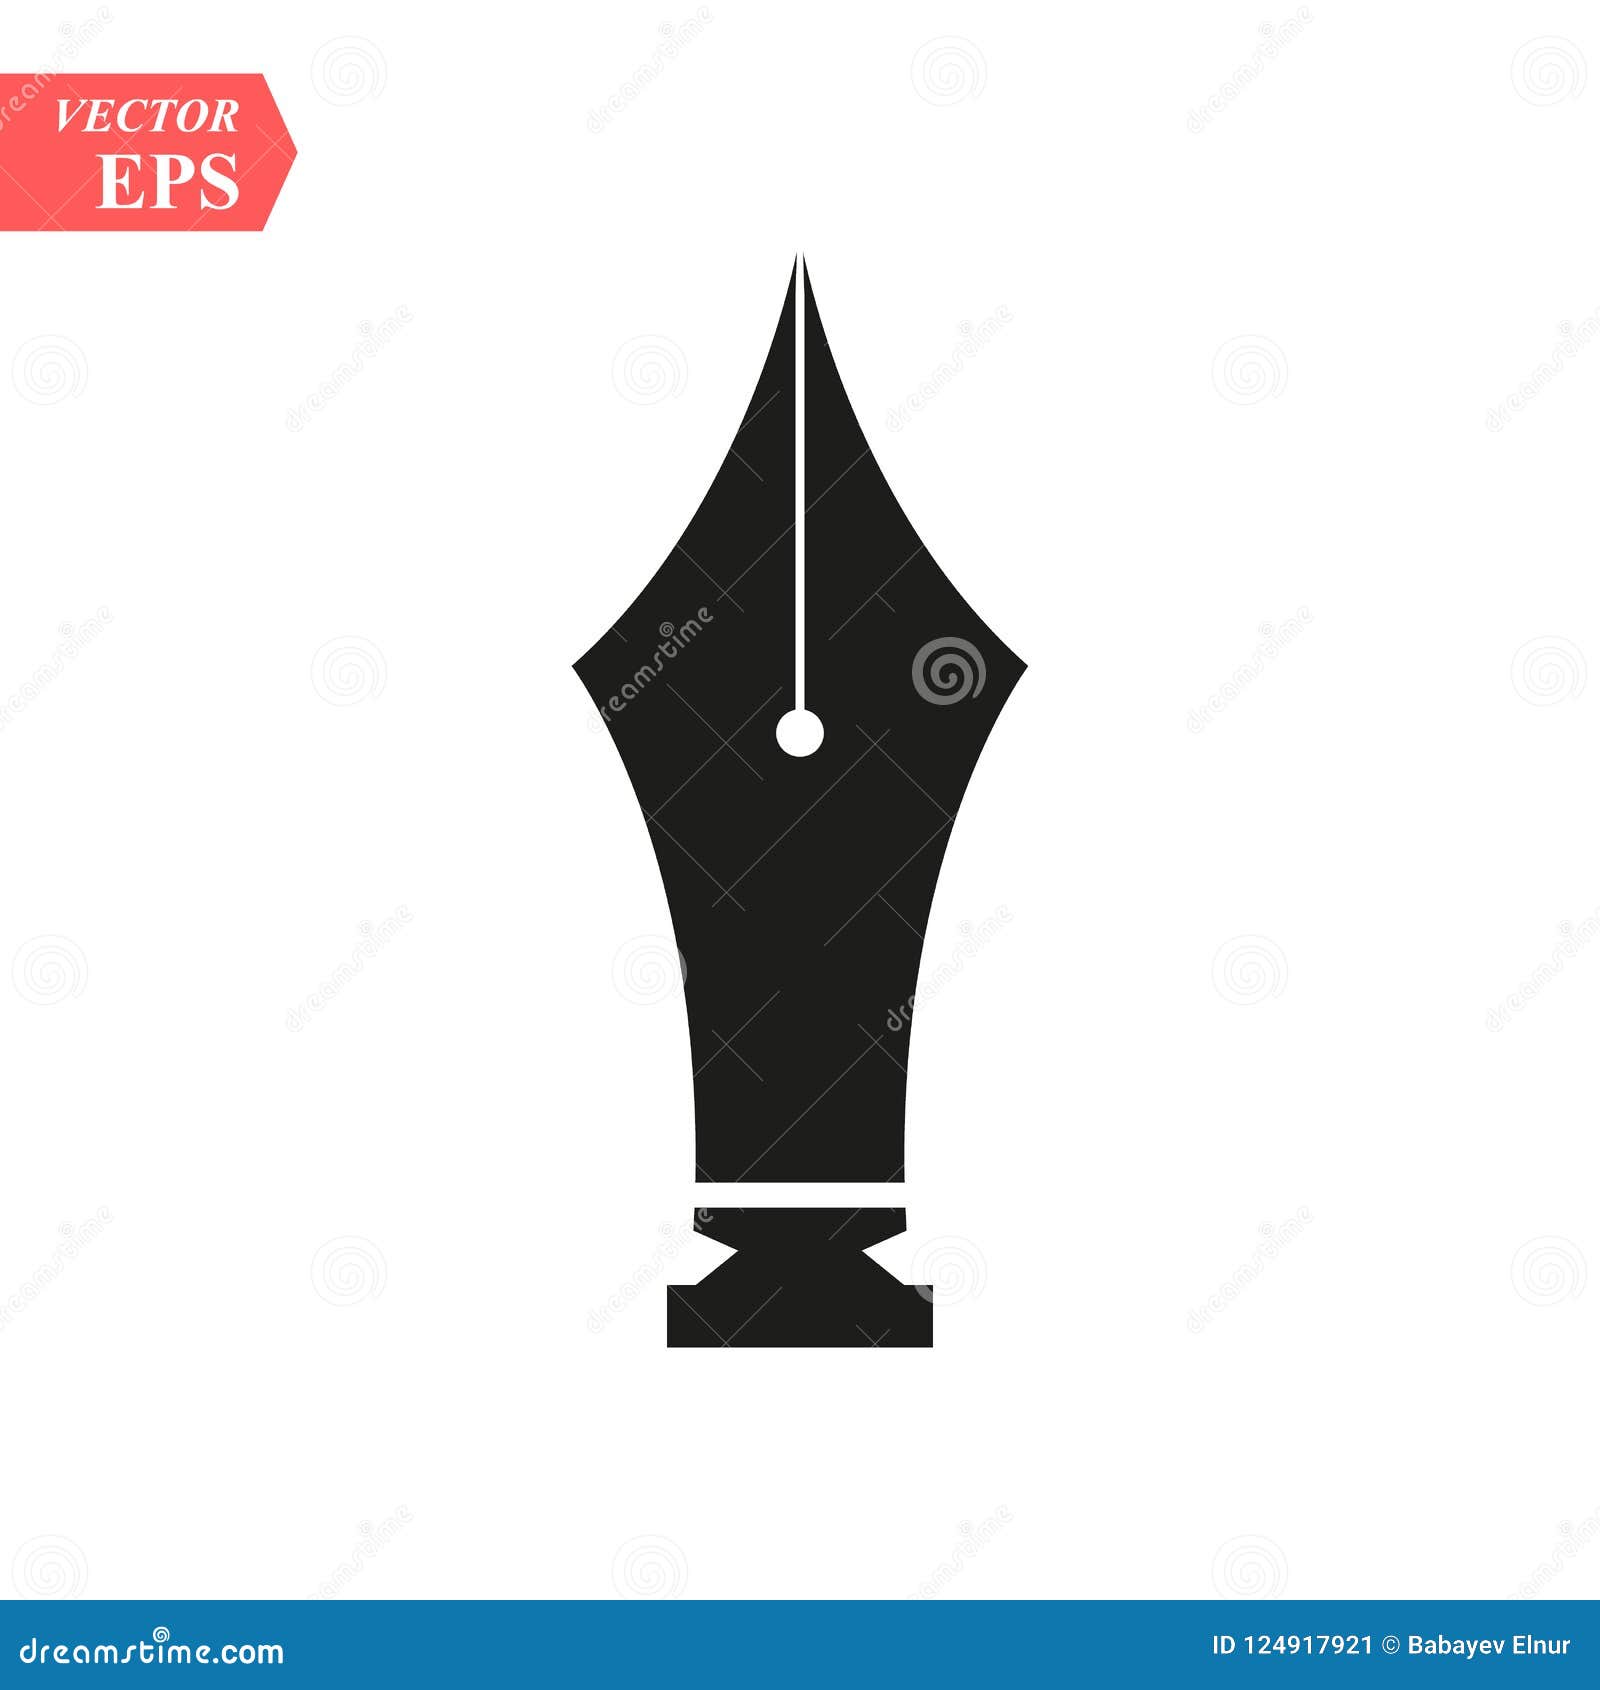 fountain pen nib or tip for writing flat  icon for apps and websites